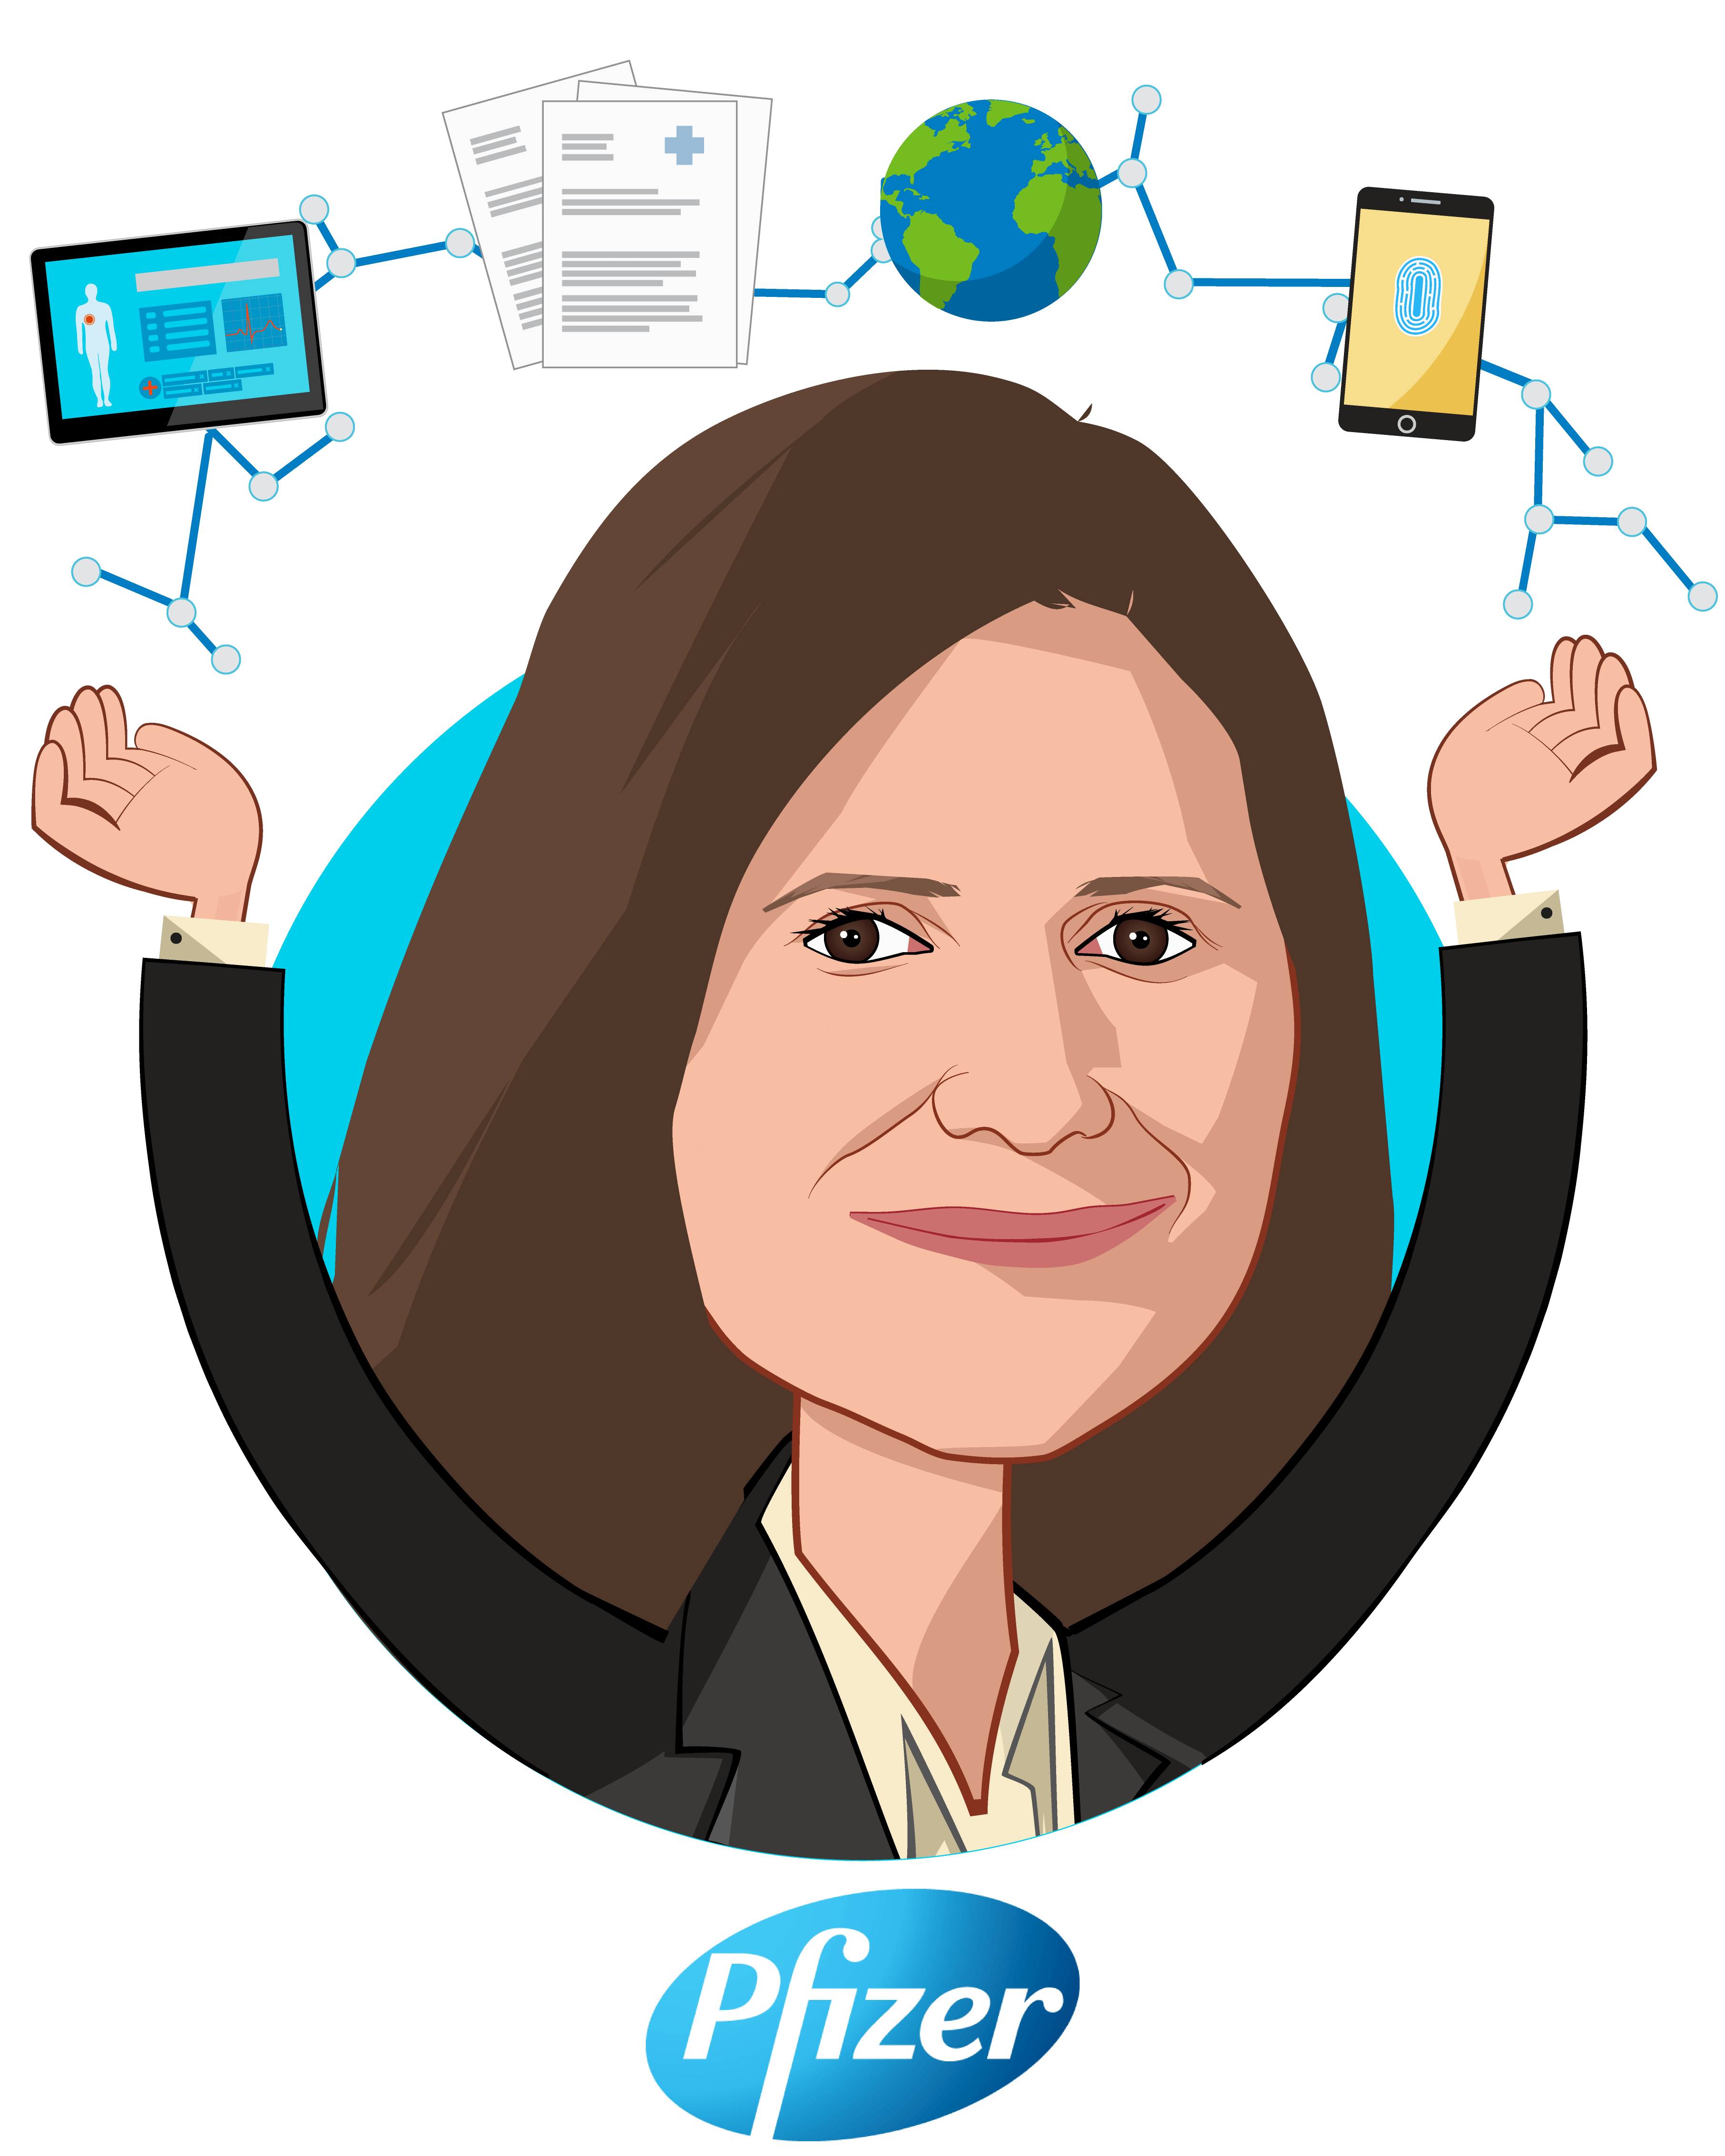 Overlay caricature of Lidia Fonseca, who is speaking at HLTH and is Chief Digital and Technology Officer and Executive Vice President at Pfizer